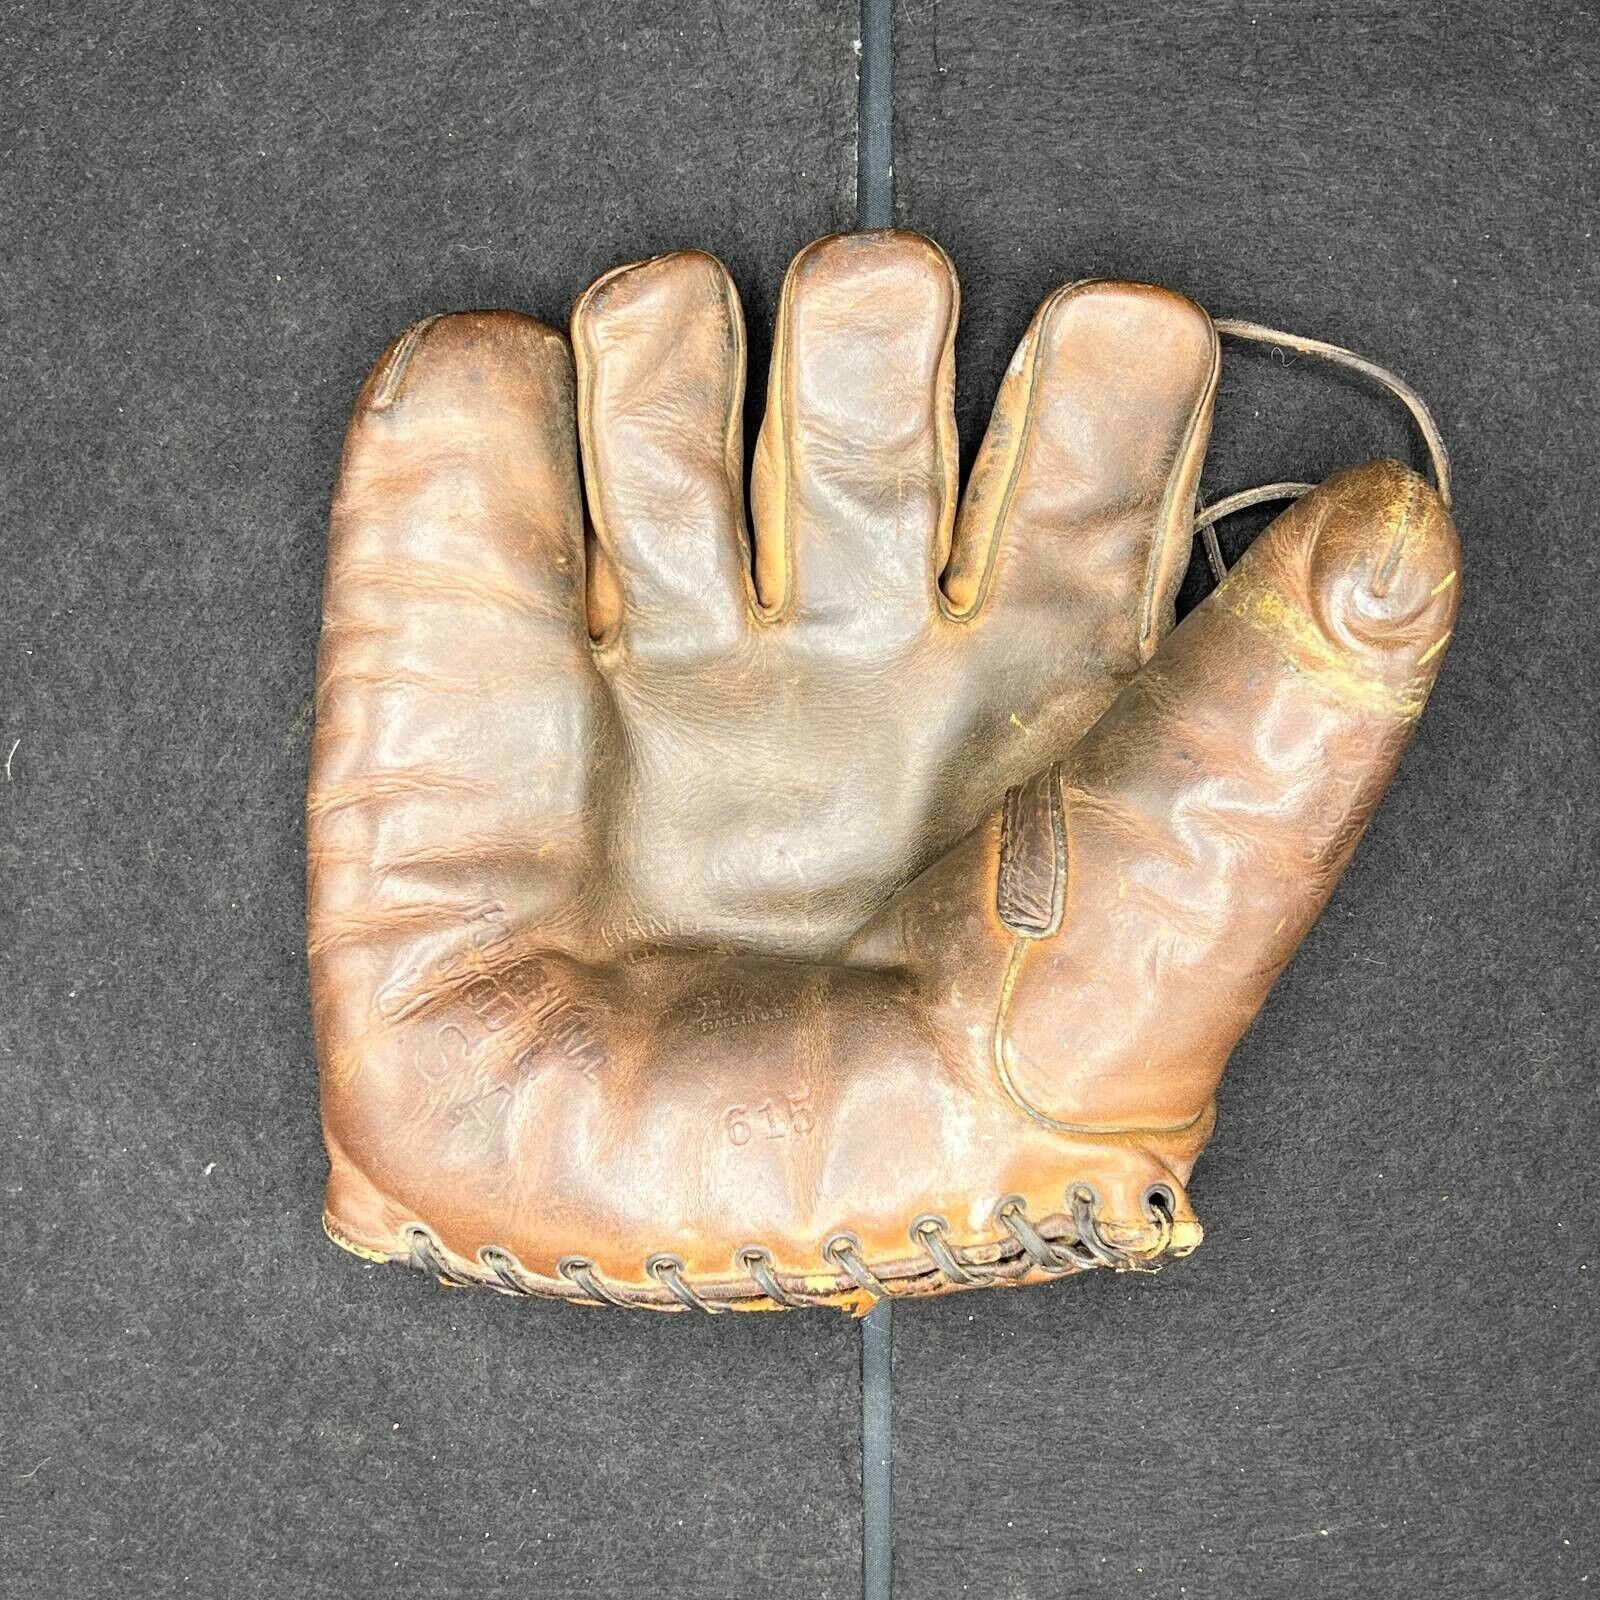 Vintage Wison Model 615 Baseball Glove Brown 1940s Right-Handed Mit Collectors